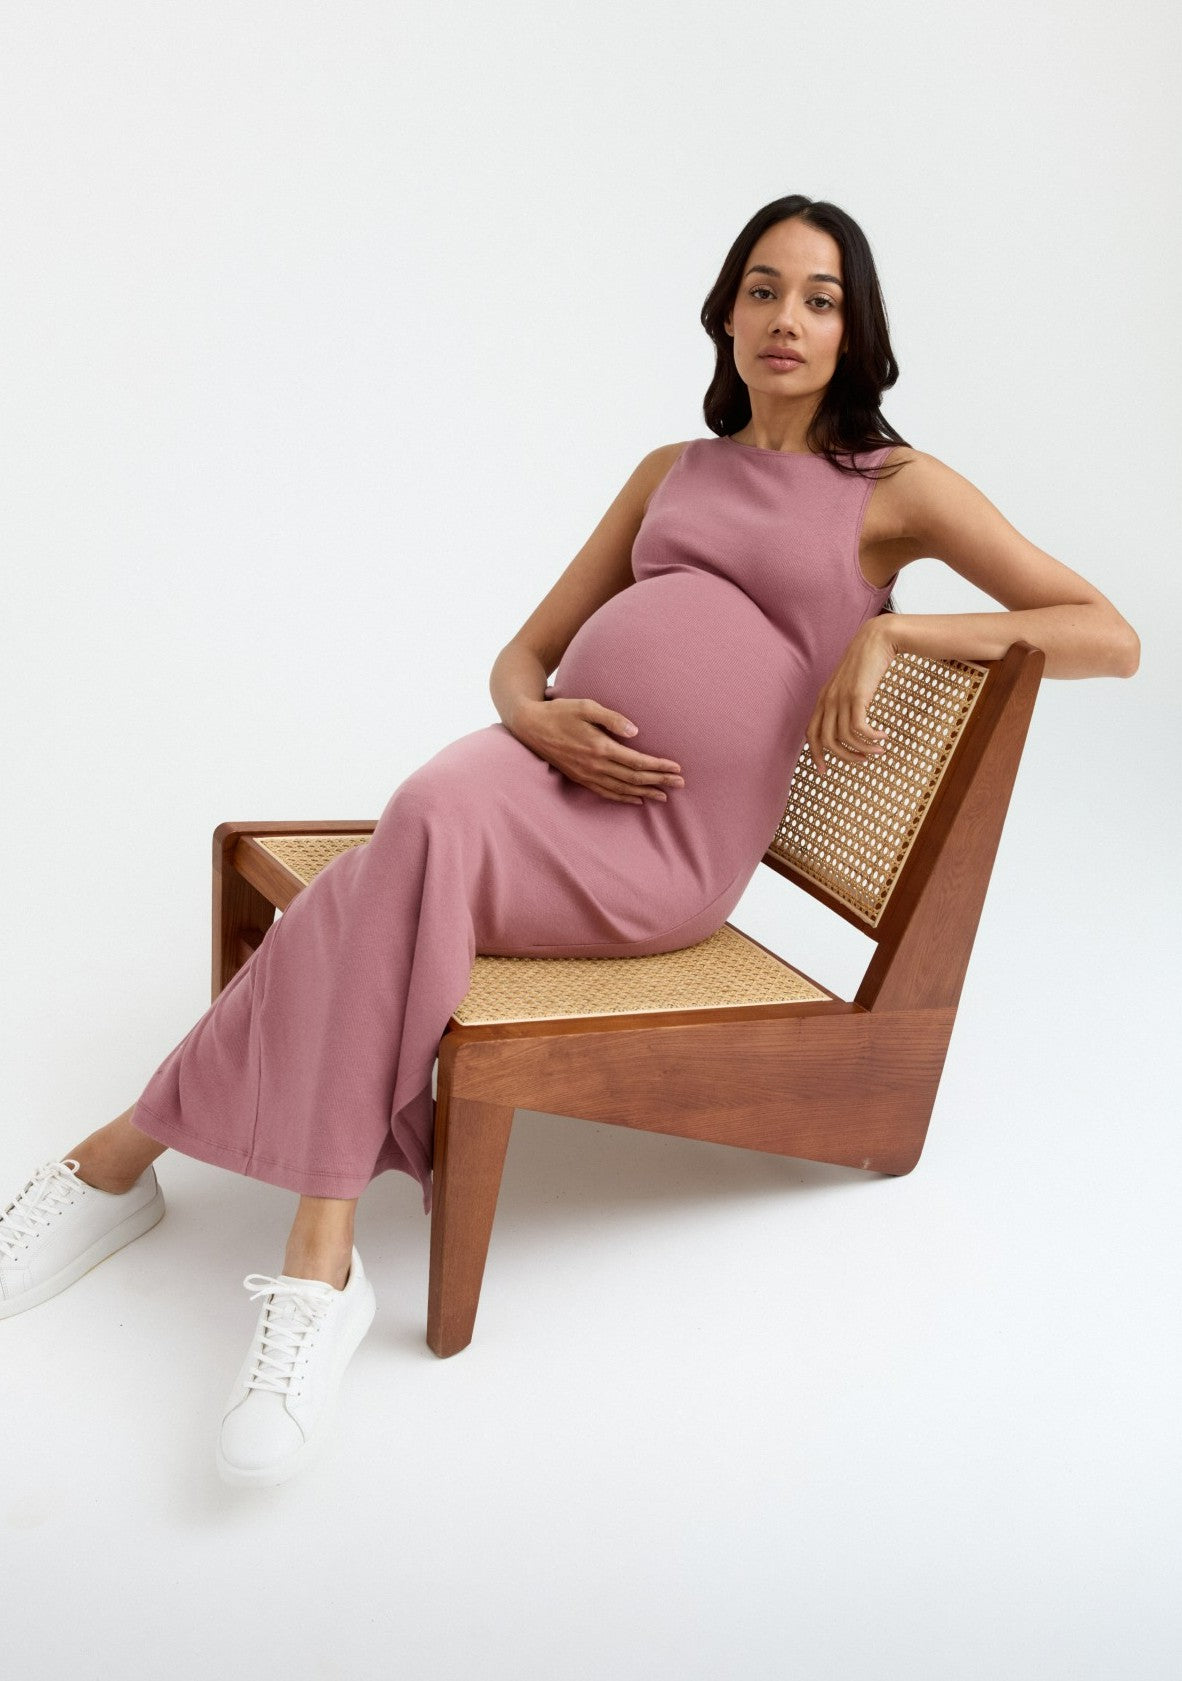 Carry Maternity  Best Maternity Clothes Canada – Carry Maternity Canada